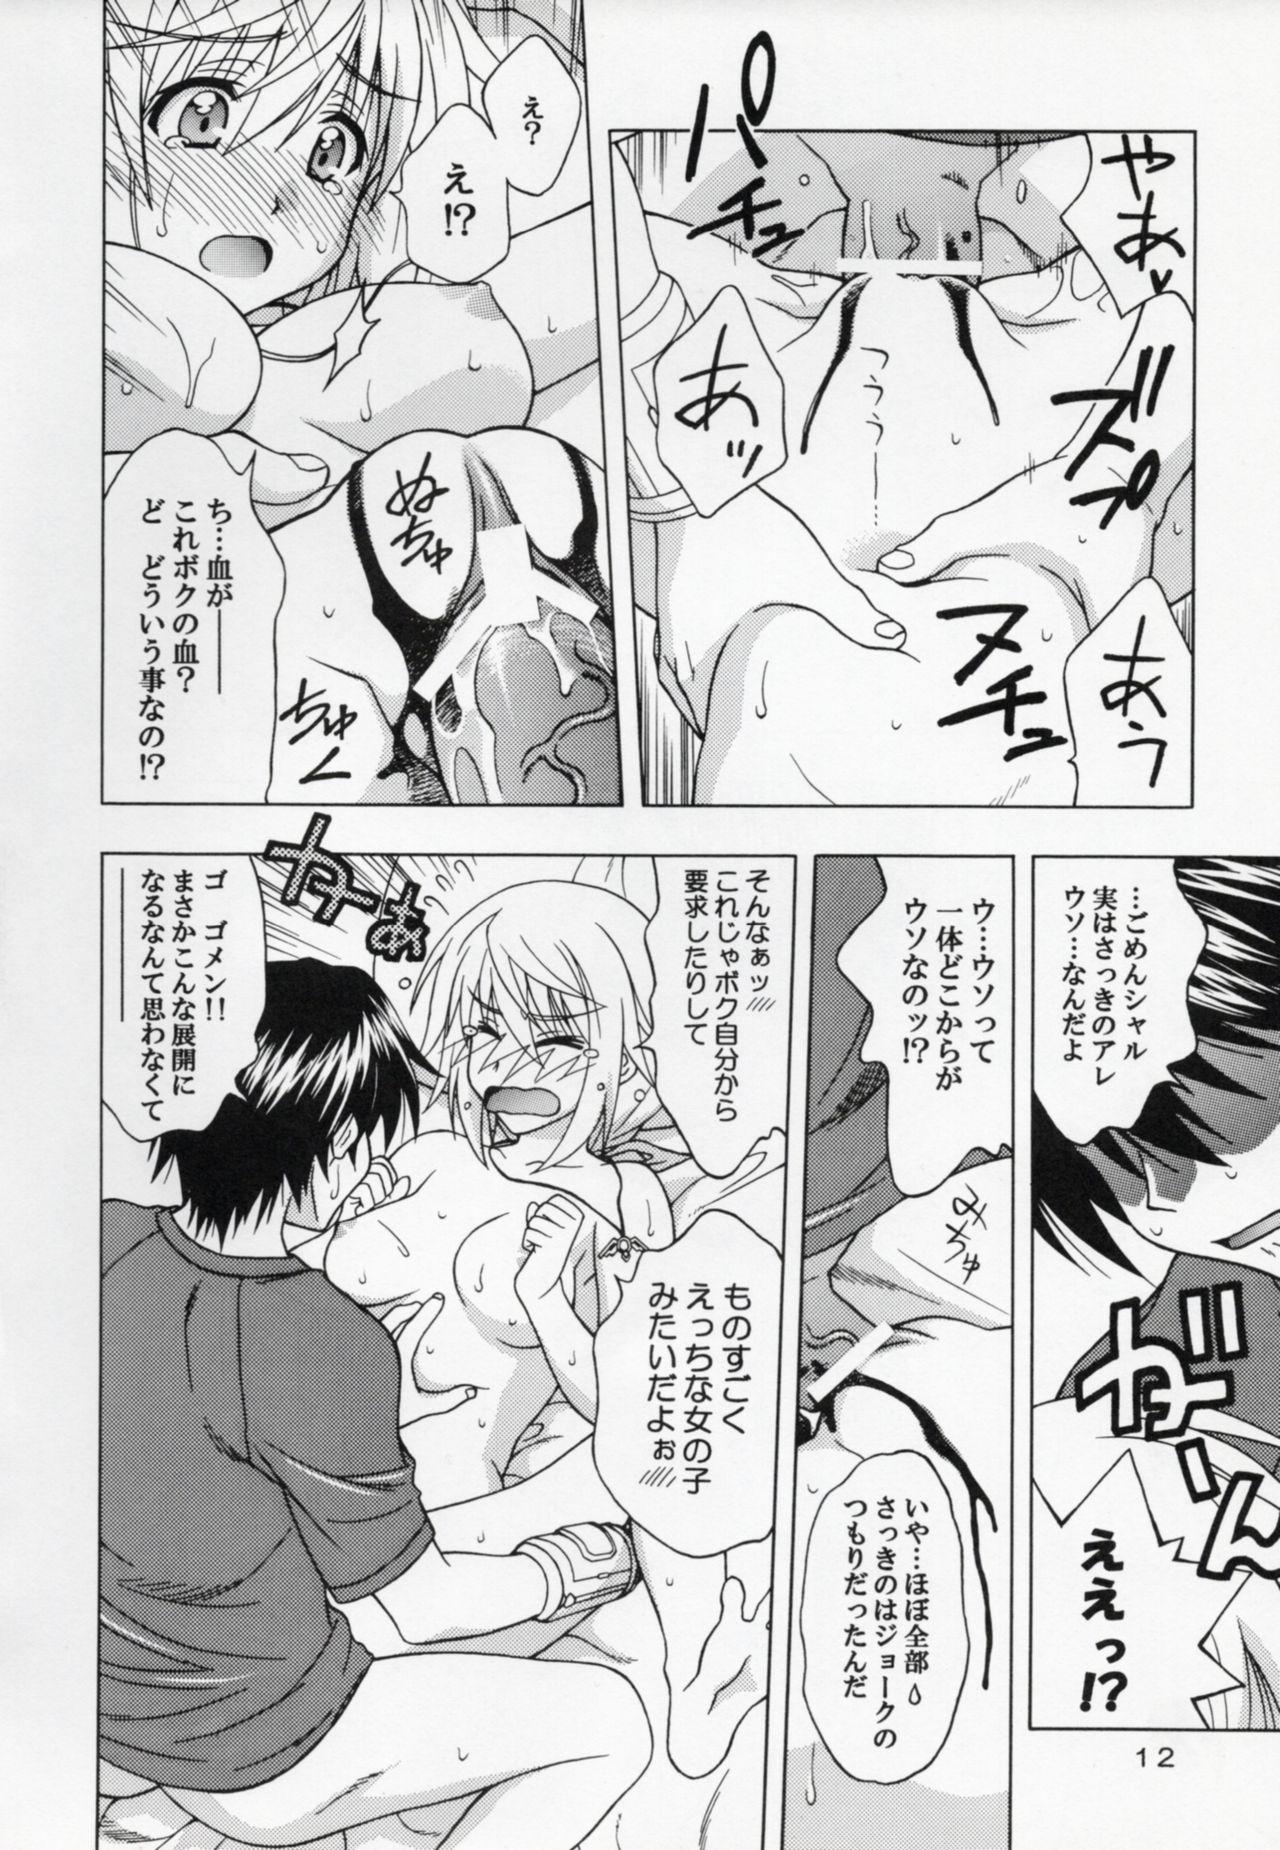 Naturaltits I.S.C - Infinite stratos Tits - Page 11